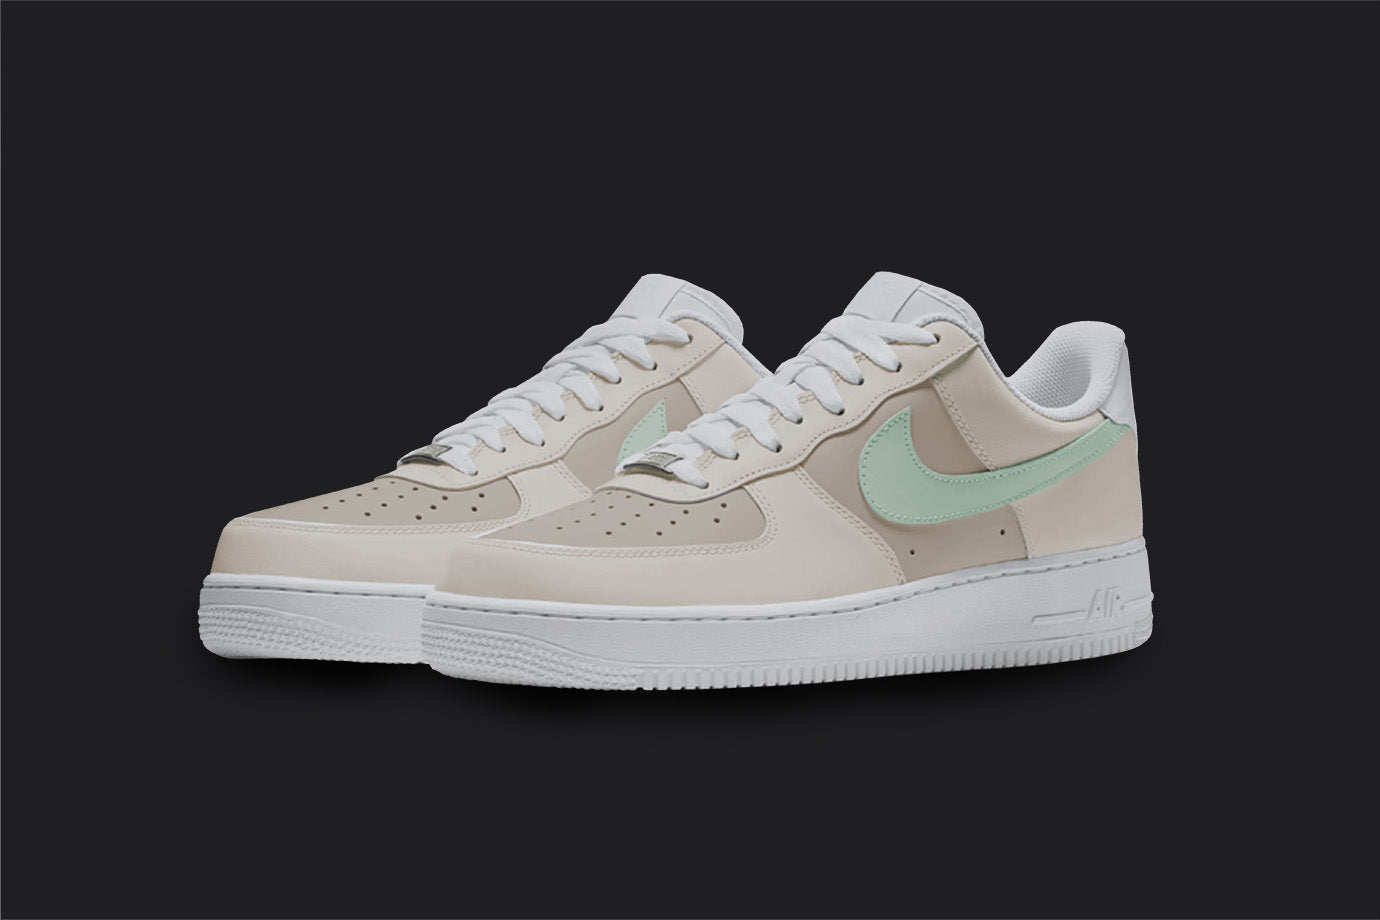 The image is of a Custom Nike Air force 1 sneaker pair on a blank black background. The white custom sneakers have a creme tone and the nike logo is in a mint colorway. 